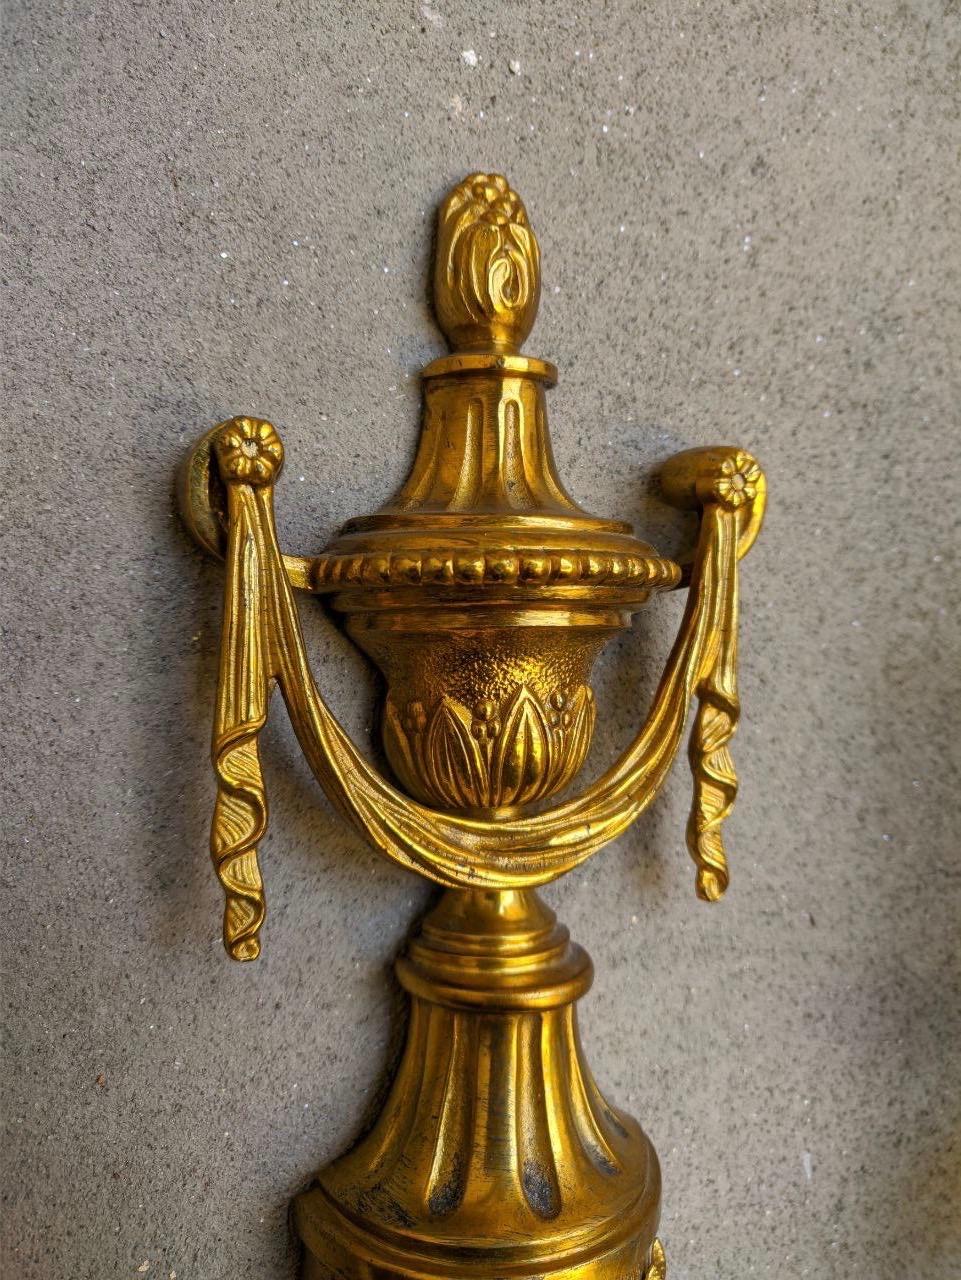 Louis XVI style gilt bronze three-light sconce with urn top and scroll arms. The vegetal decoration on the body and lower pine finial. Available in different finishings, colors and decorations.